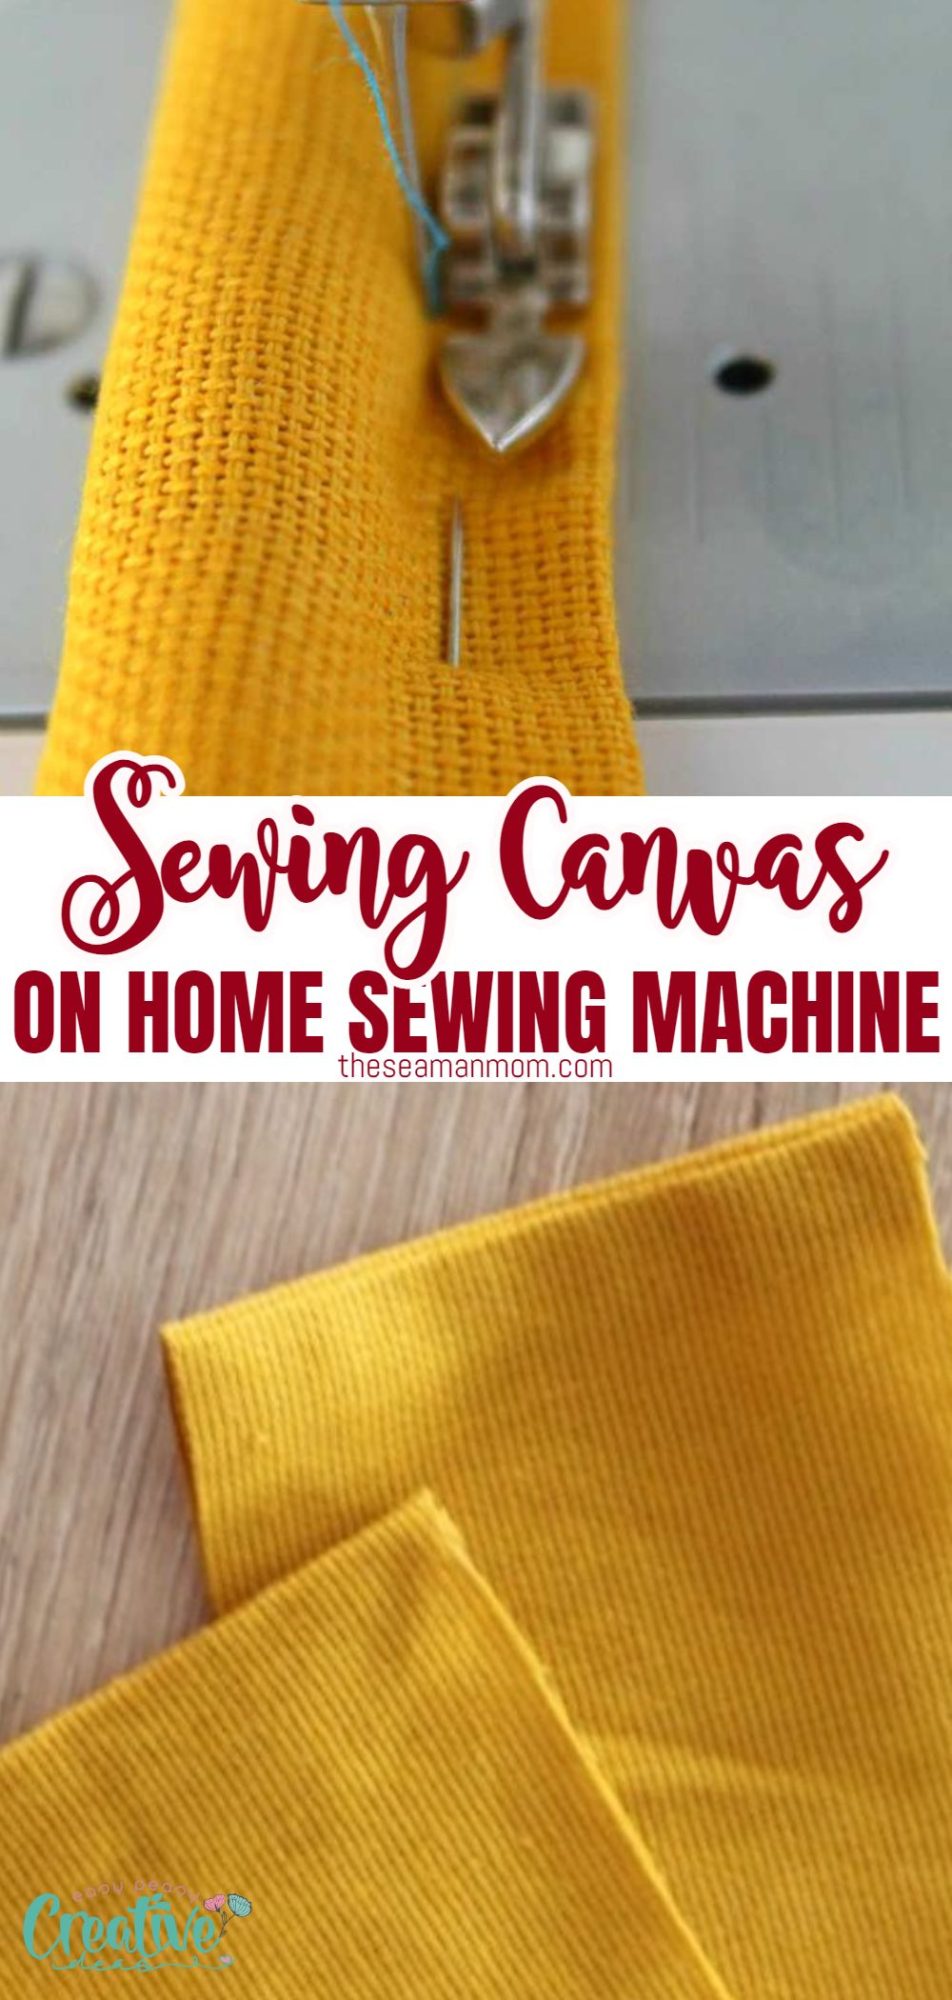 Tips For SEWING CANVAS Fabric- Easy Peasy Creative Ideas